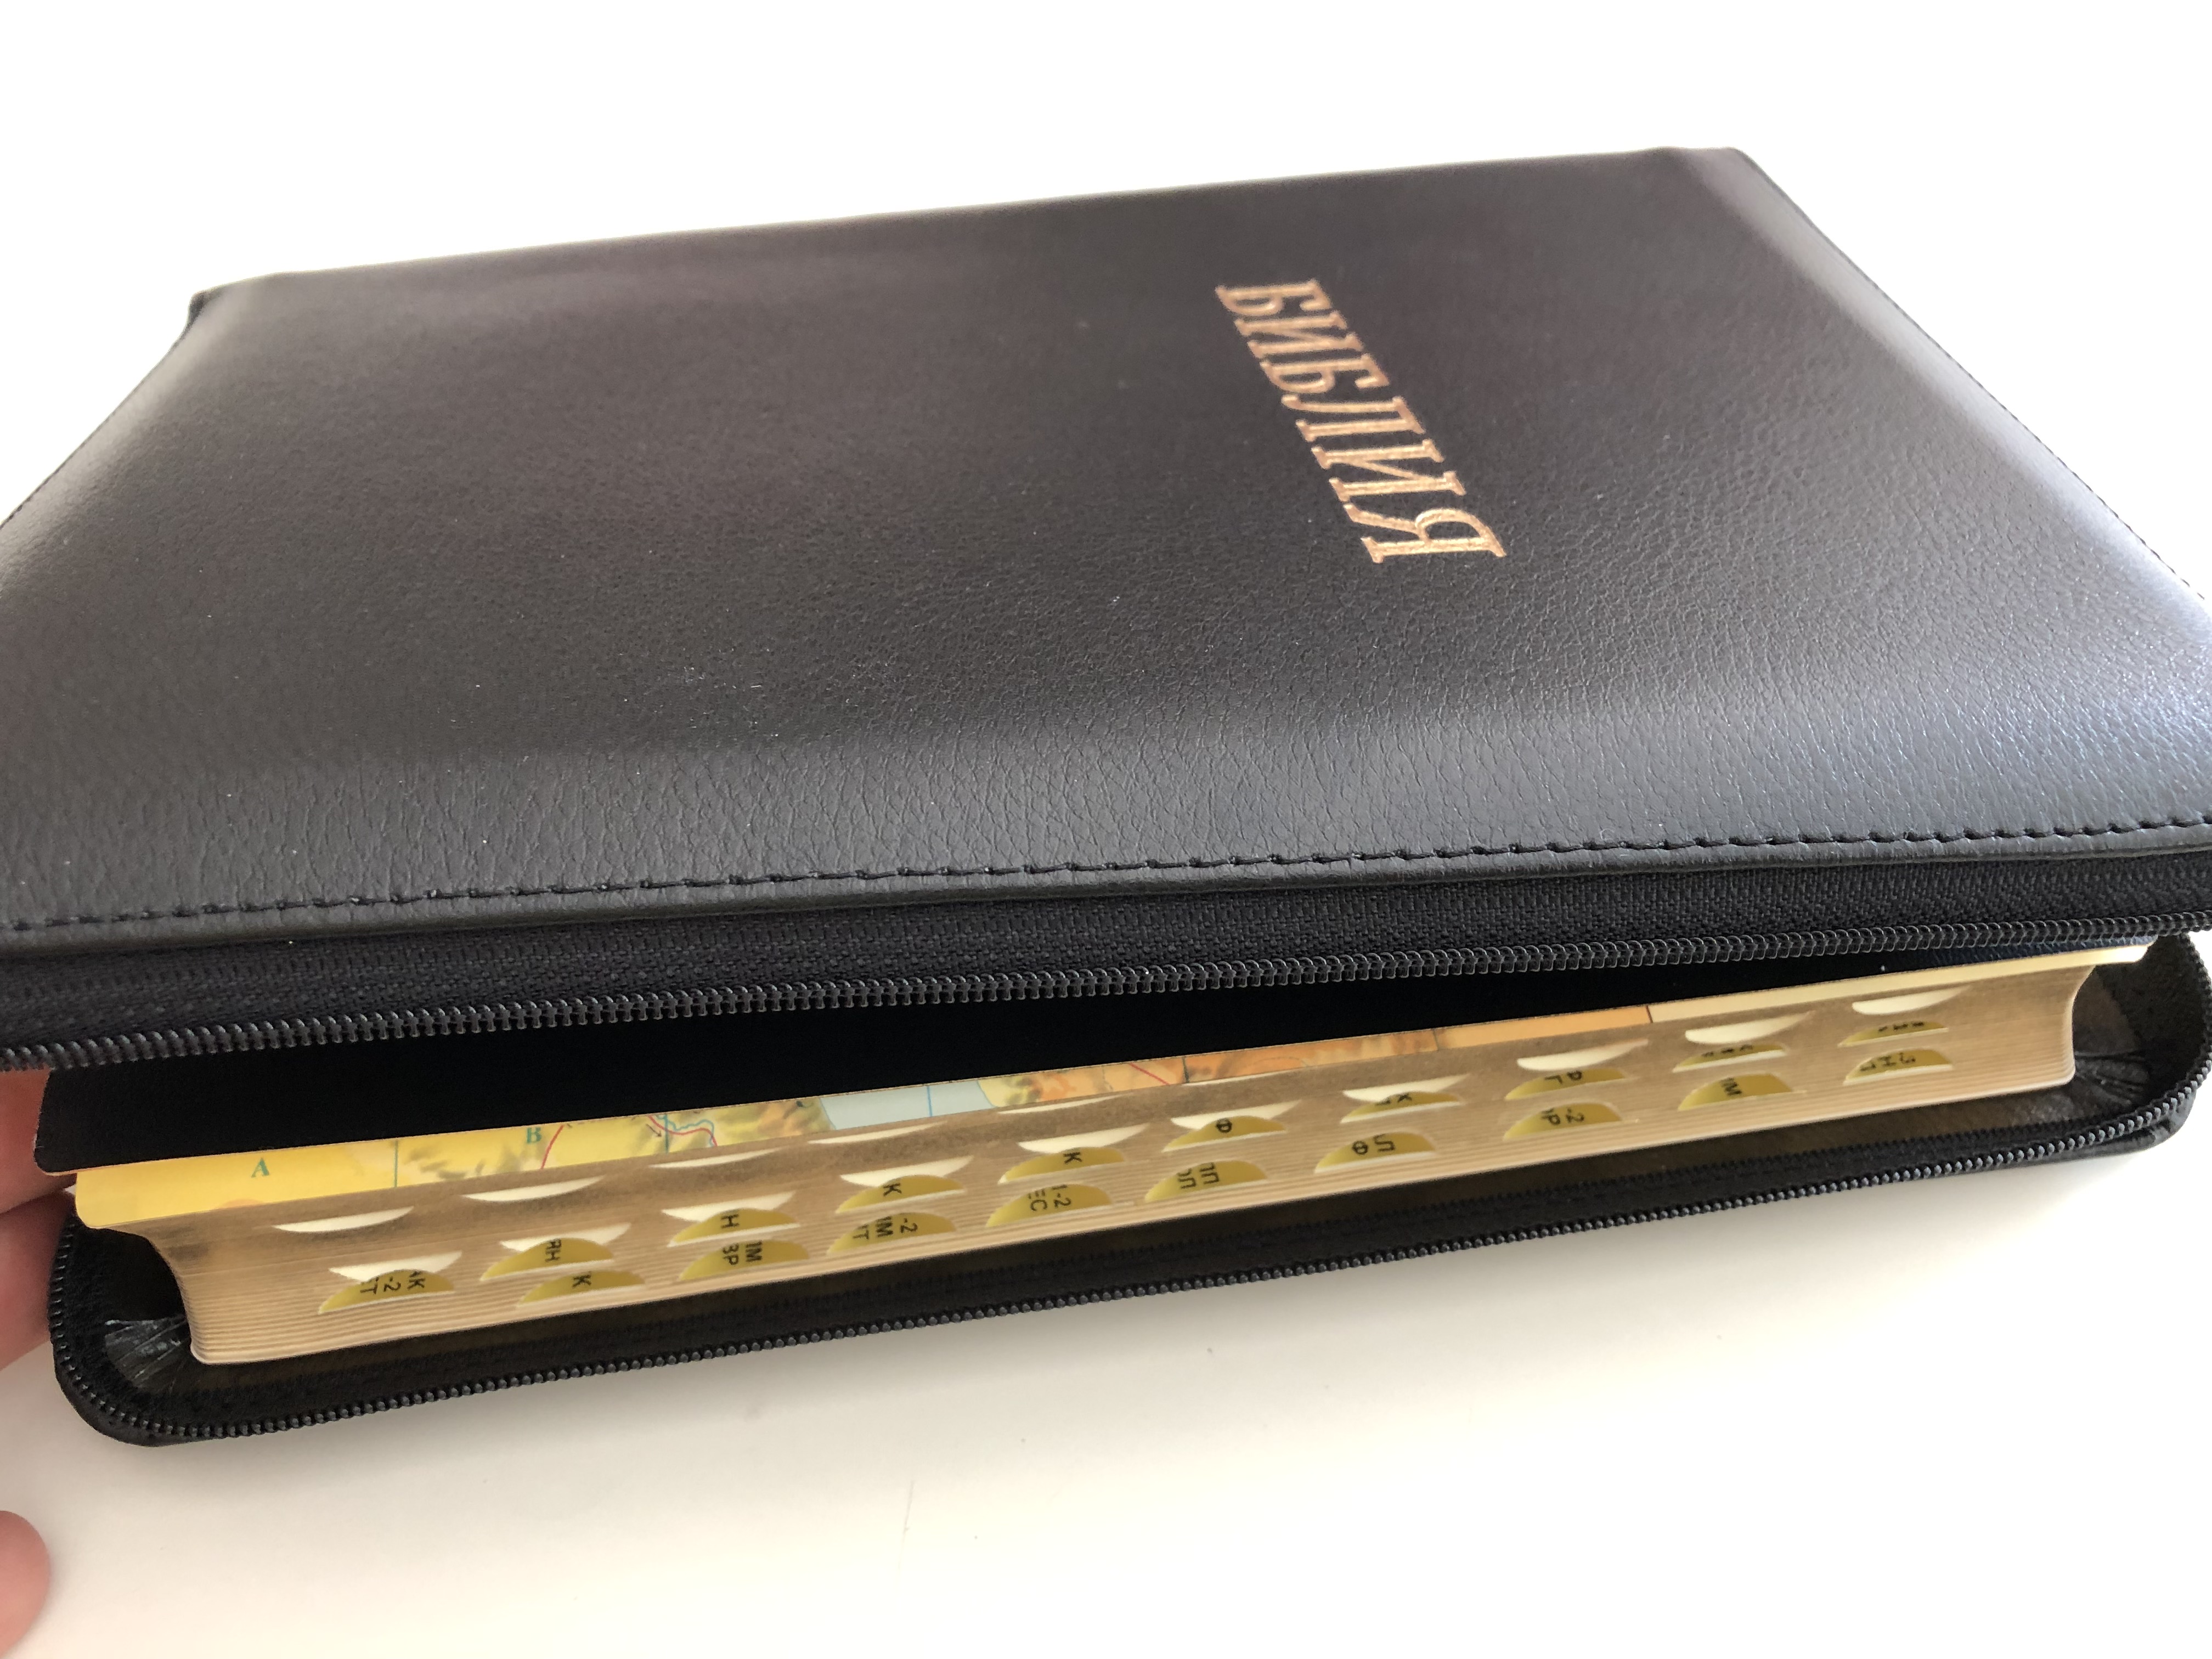 -russian-leather-bound-holy-bible-synodal-translation-ukrainian-bible-society-2012-leather-bound-with-zipper-golden-edges-thumb-index-4-.jpg